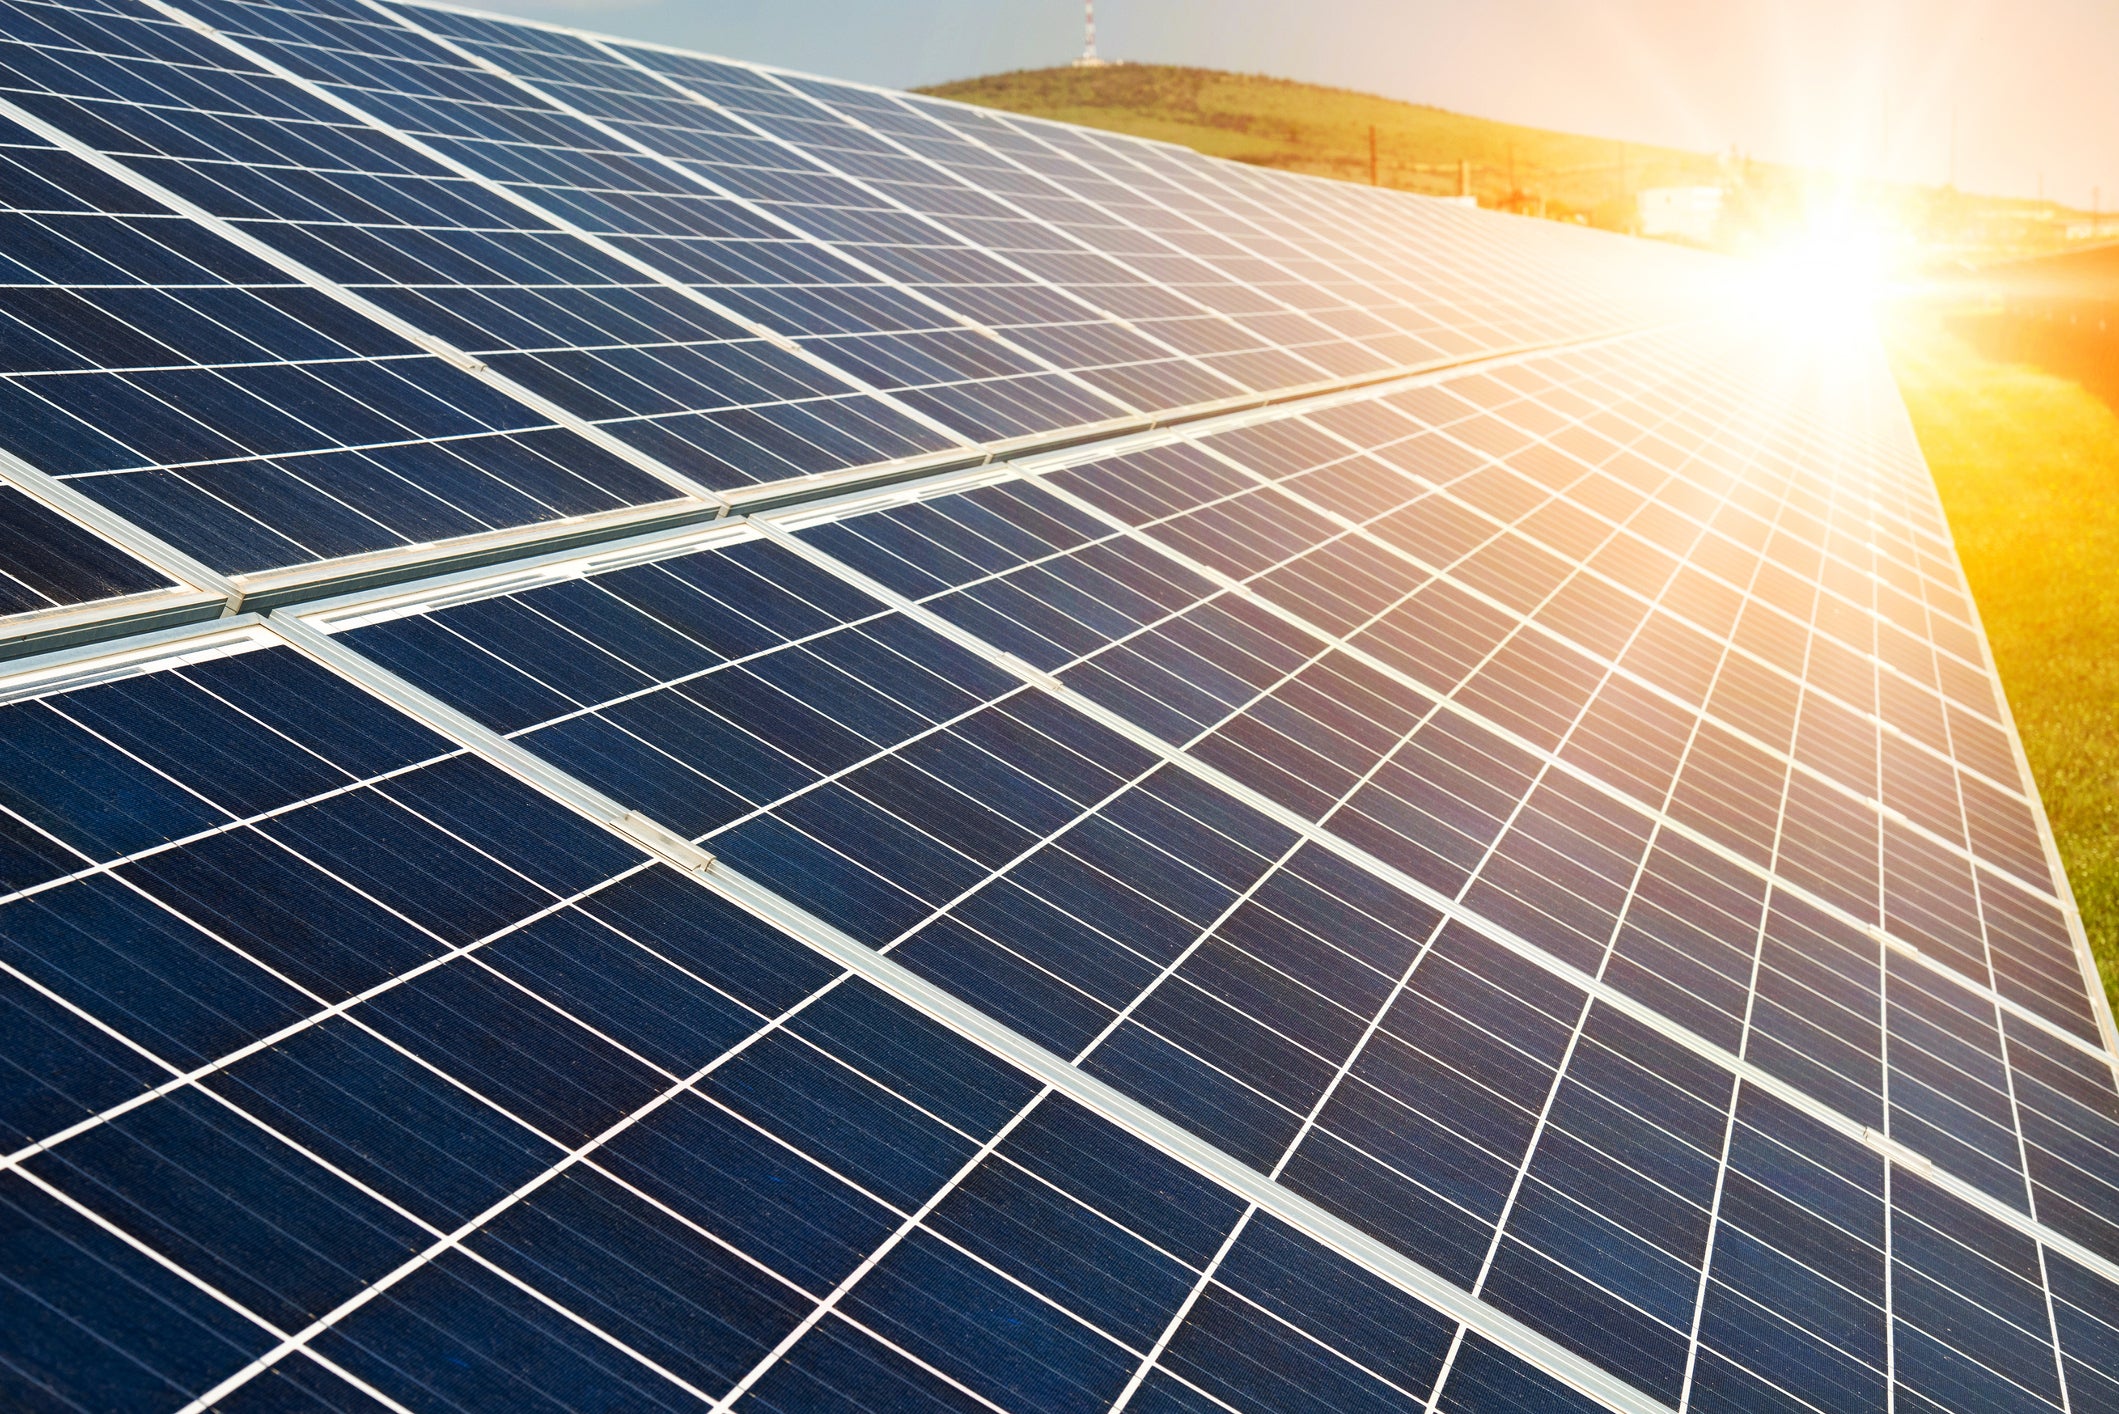 3 Solar Stocks That Could Win From the 2020 Election